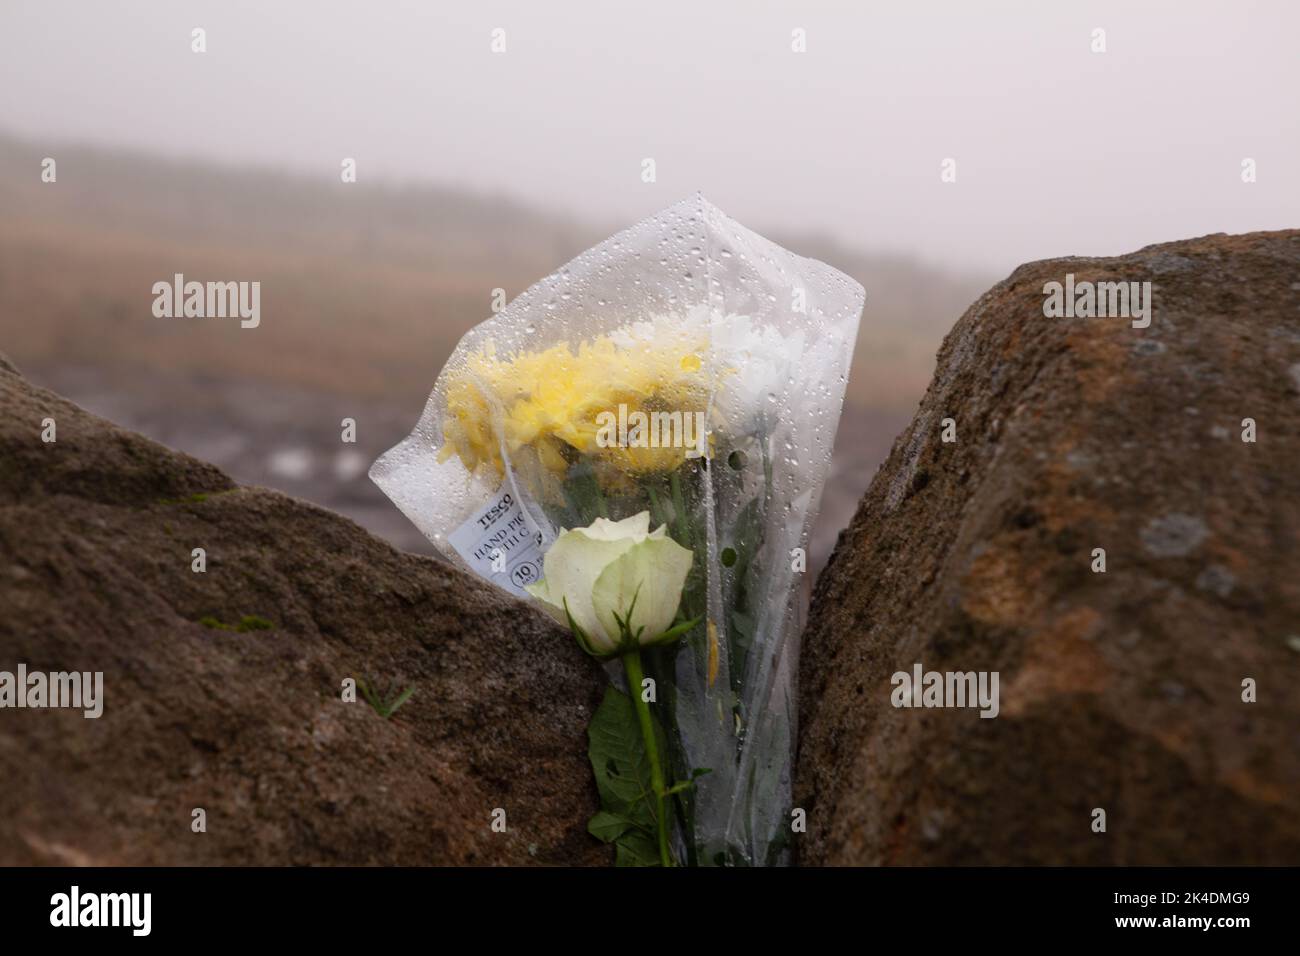 Saddleworth, Oldham, UK. 2nd October, 2022. Floral tribute left by the roadside at the scene of the recent police search for human remains in relation to the Moors Murders Peter Liggins/Alamy Live News Stock Photo